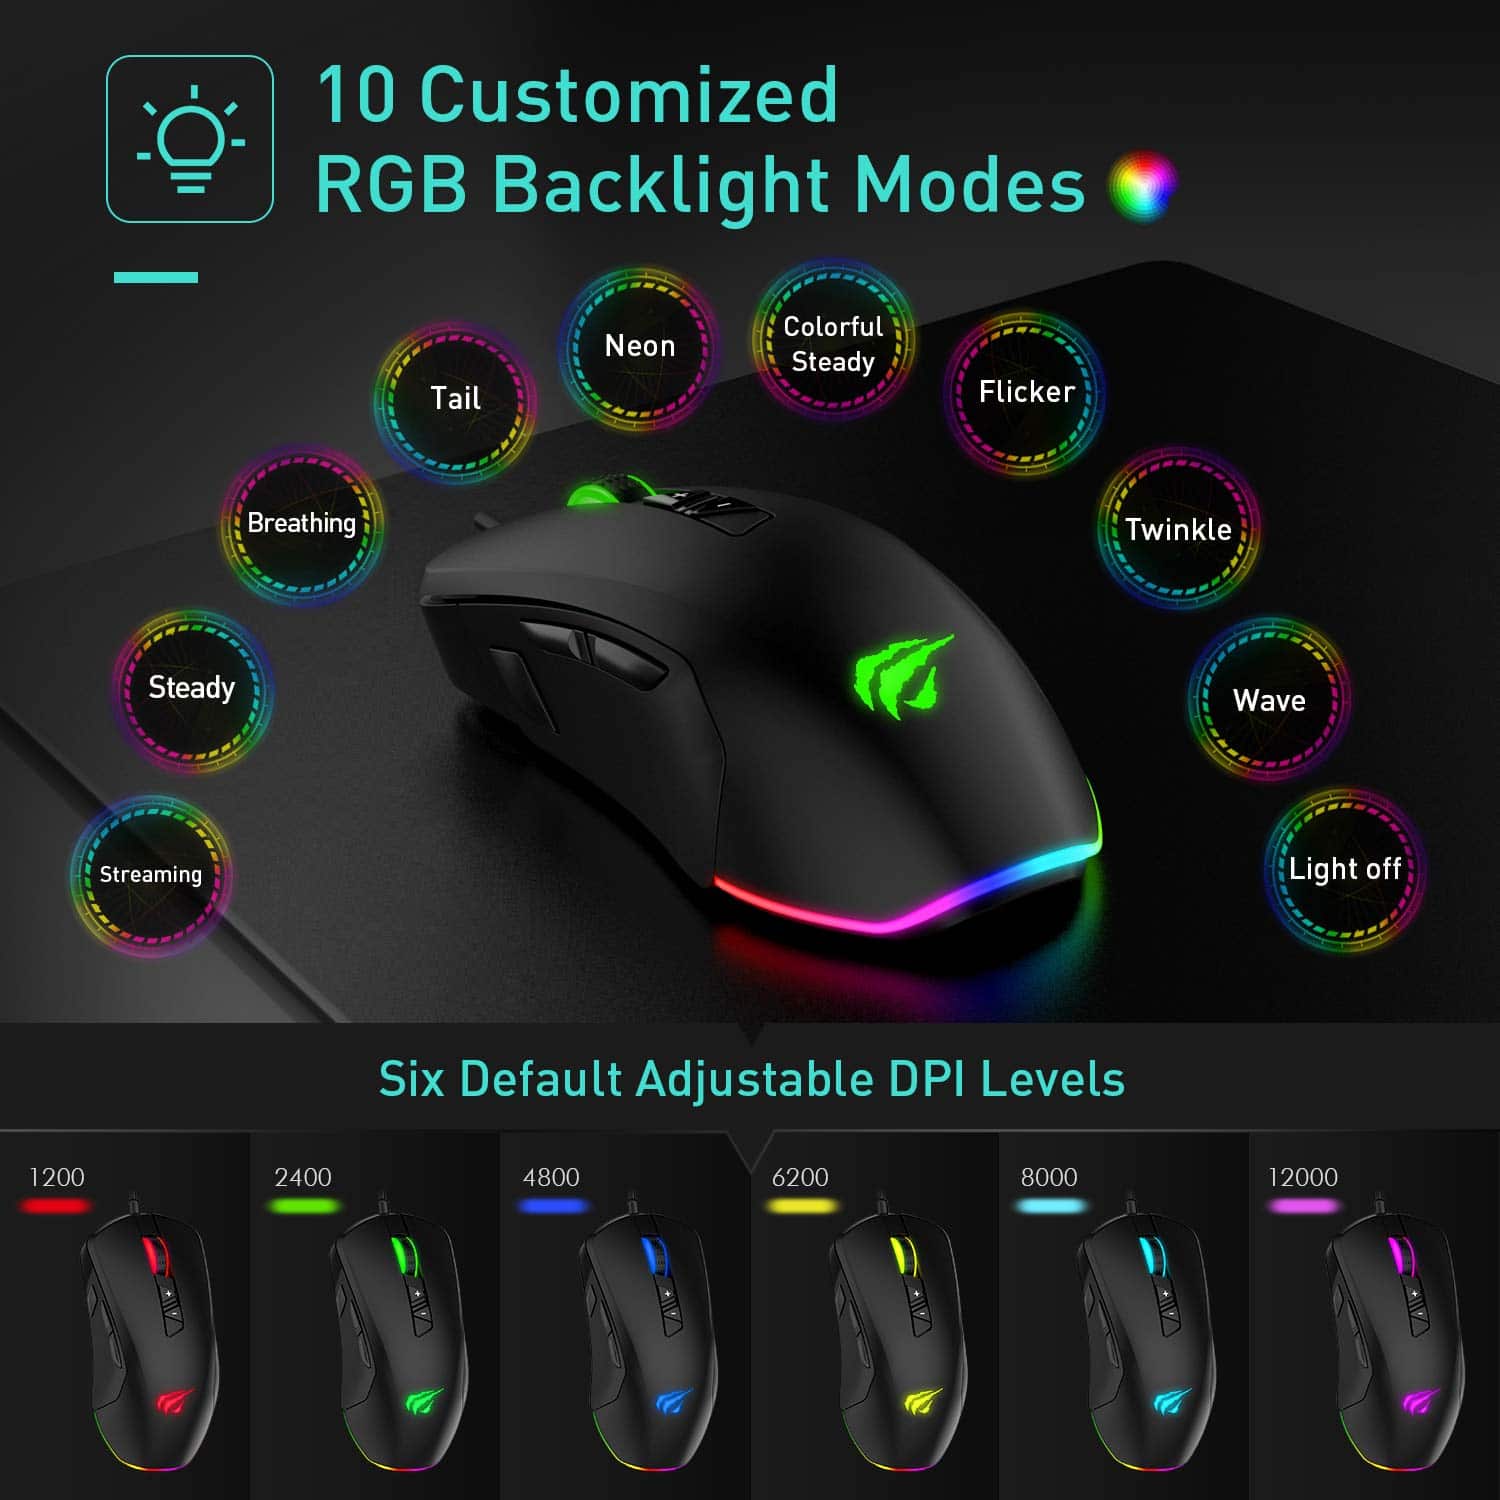 HAVIT MS760 Pro Gaming Mouse with 12000 DPI, Interchangeable Side Plates, Customizable RGB Backligts (Upgraded Version)